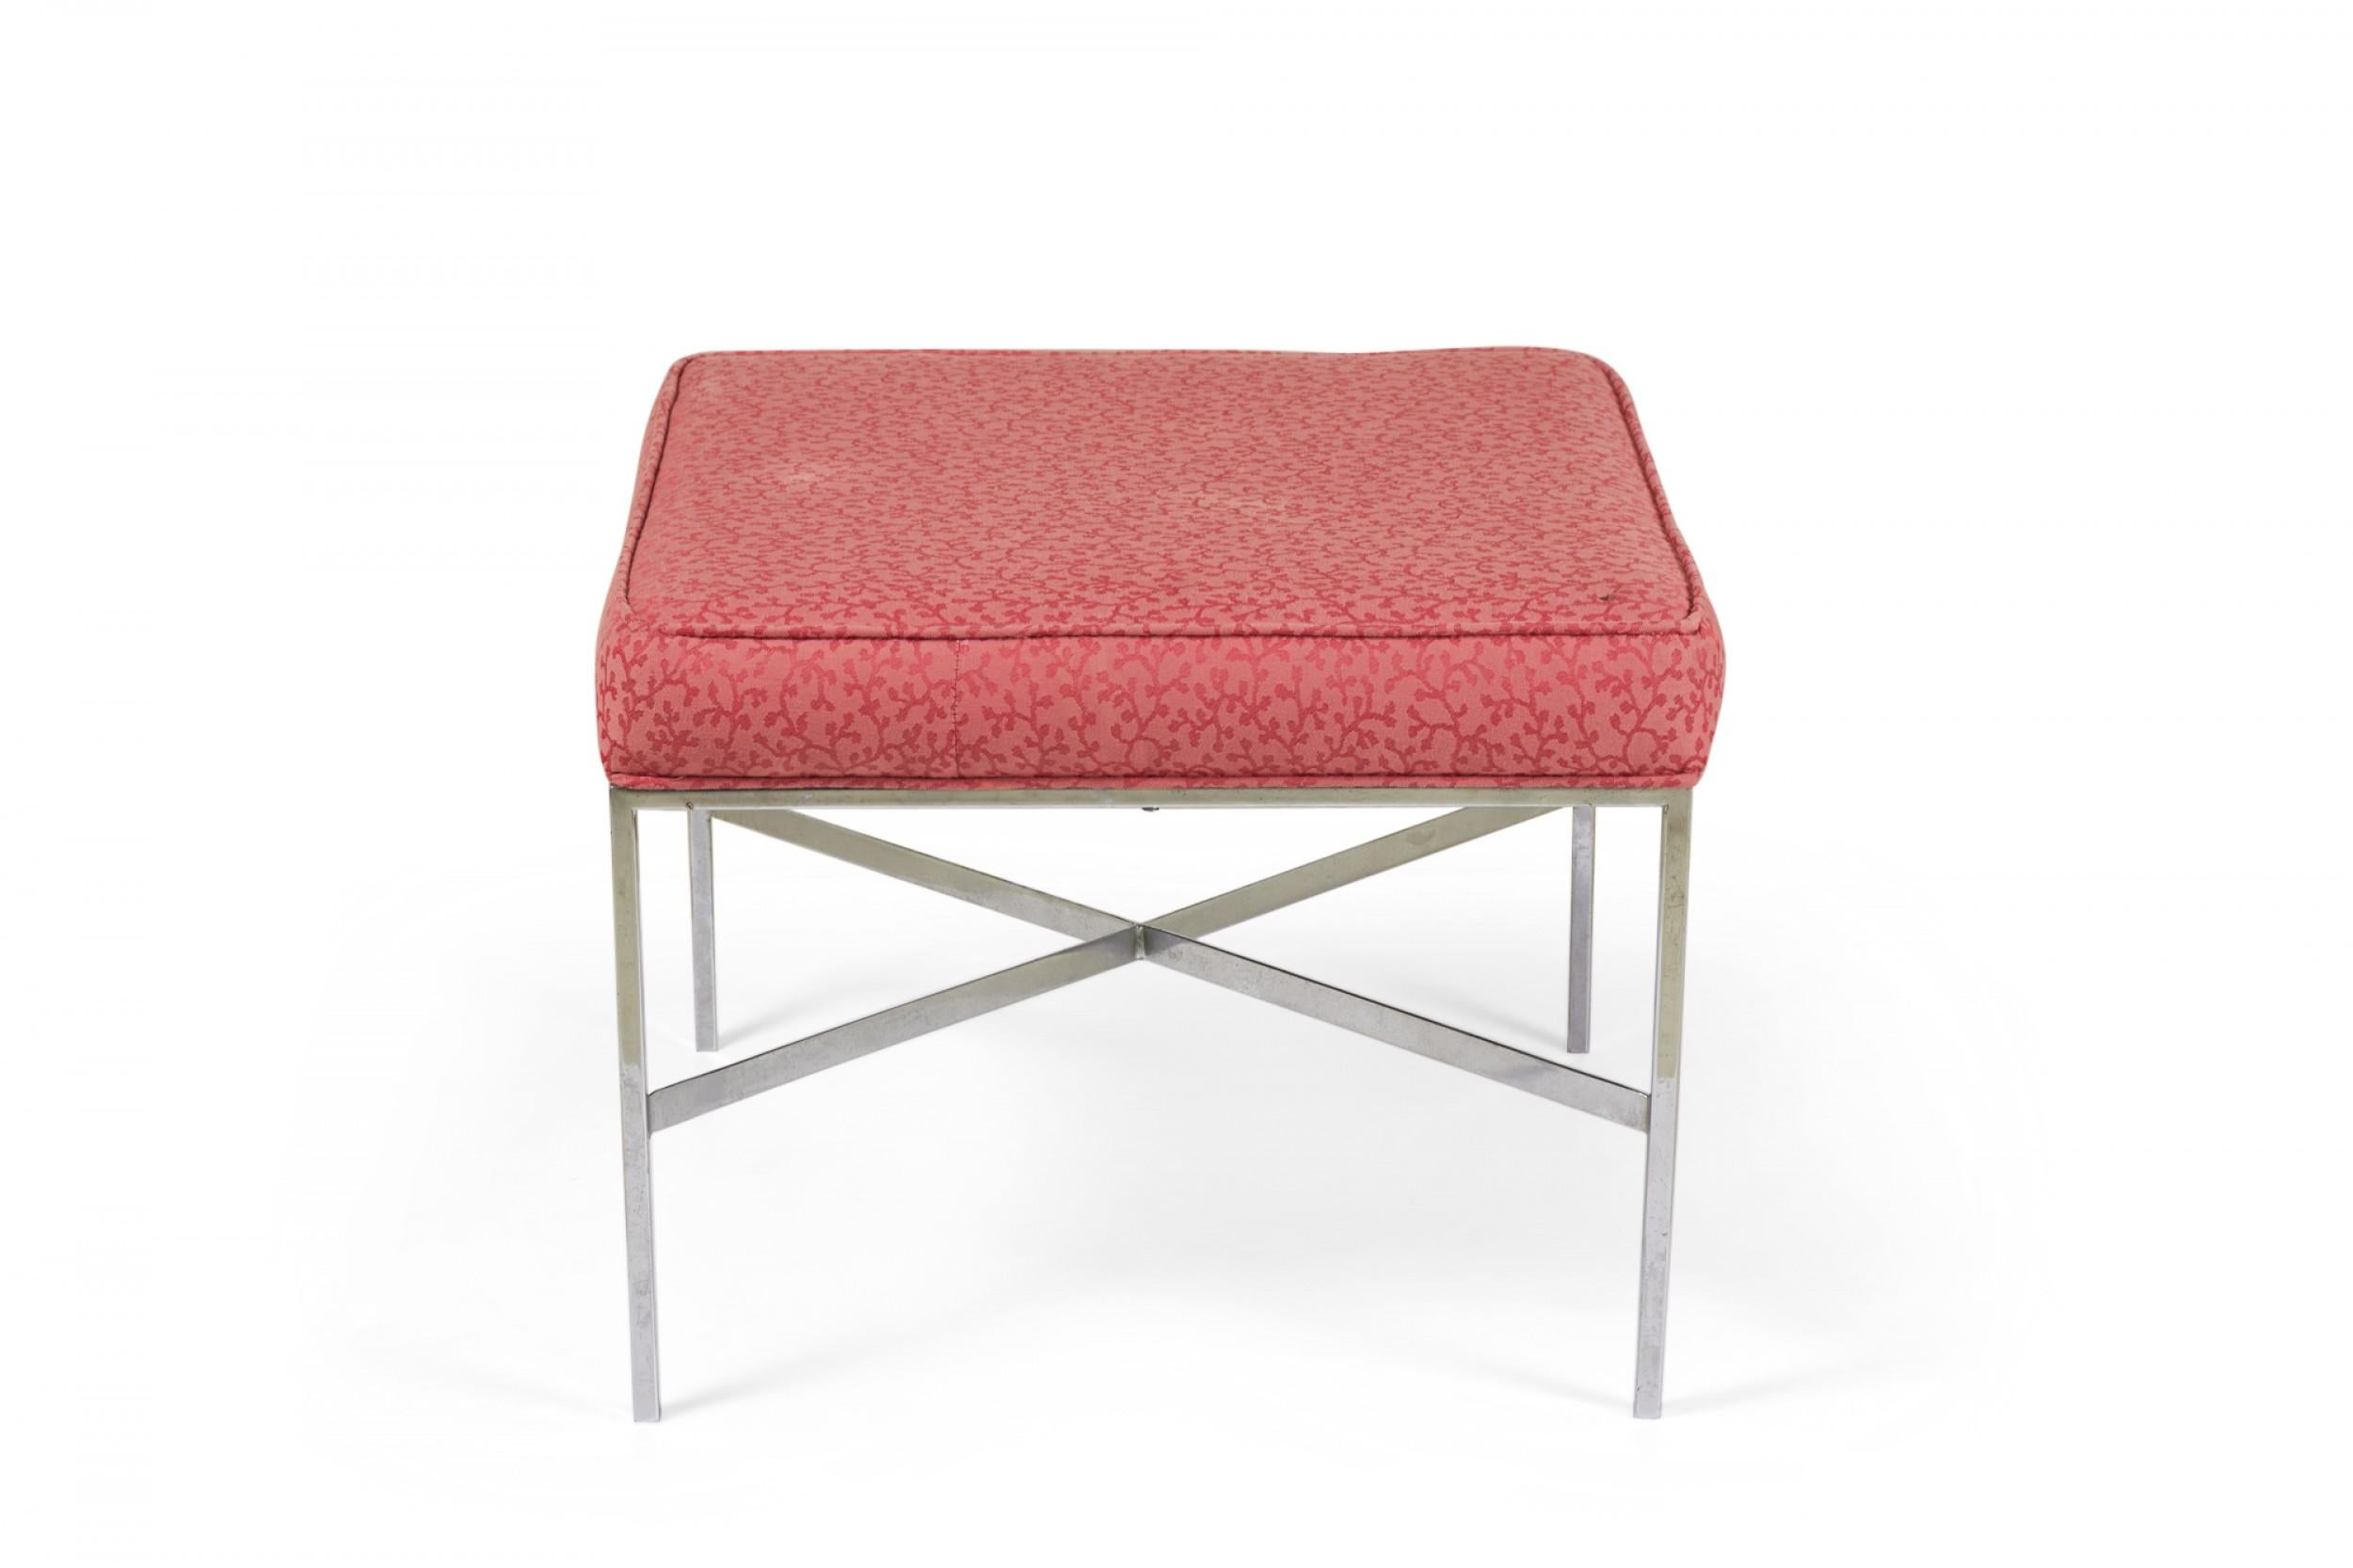 Design Institute of Chrome and Raspberry Upholstery Square Bench In Good Condition For Sale In New York, NY